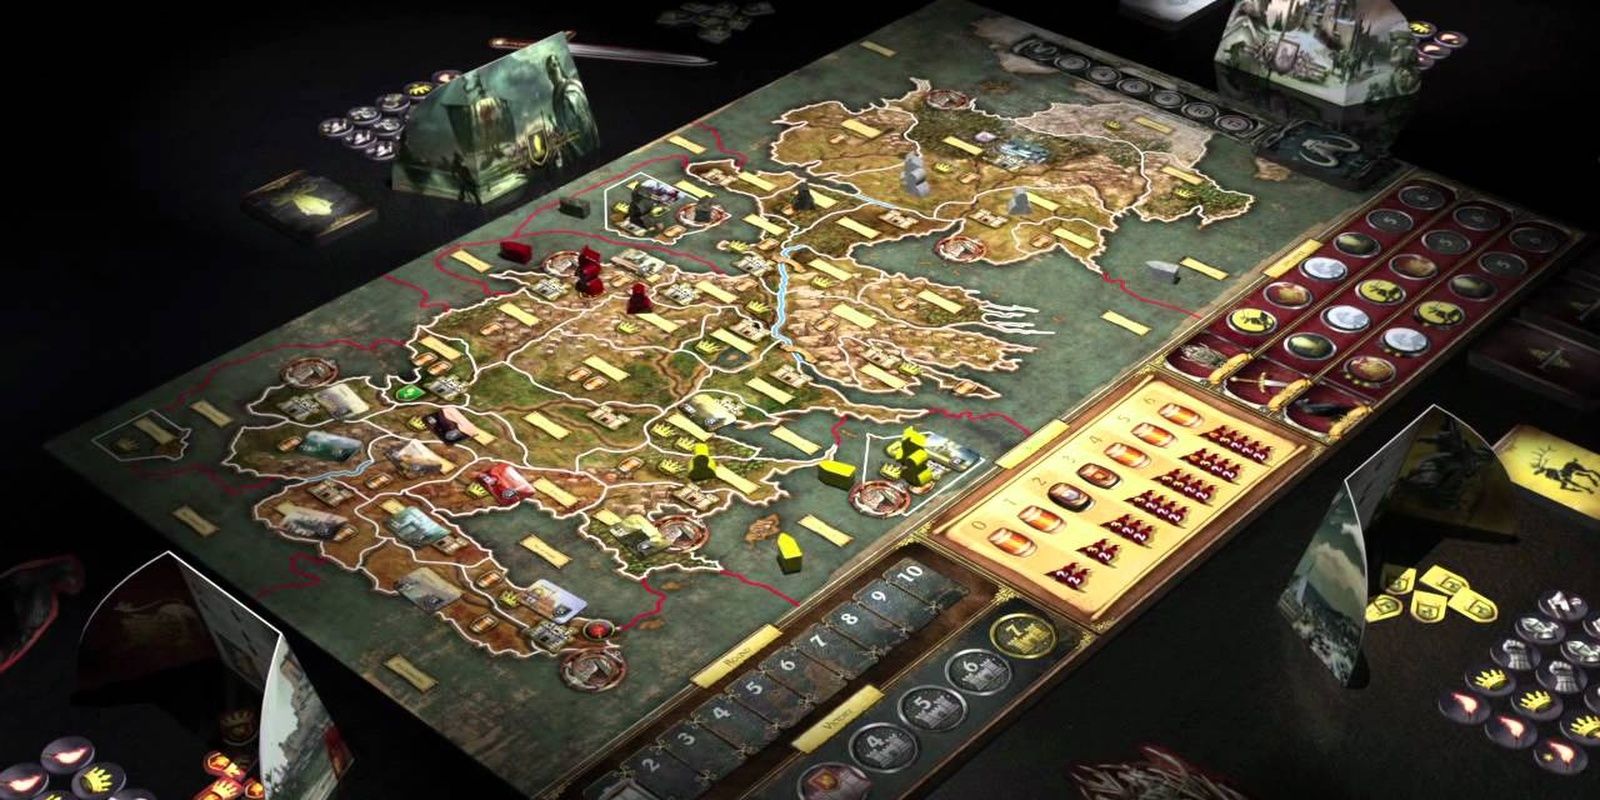 The components and board for A Game of Thrones board game.